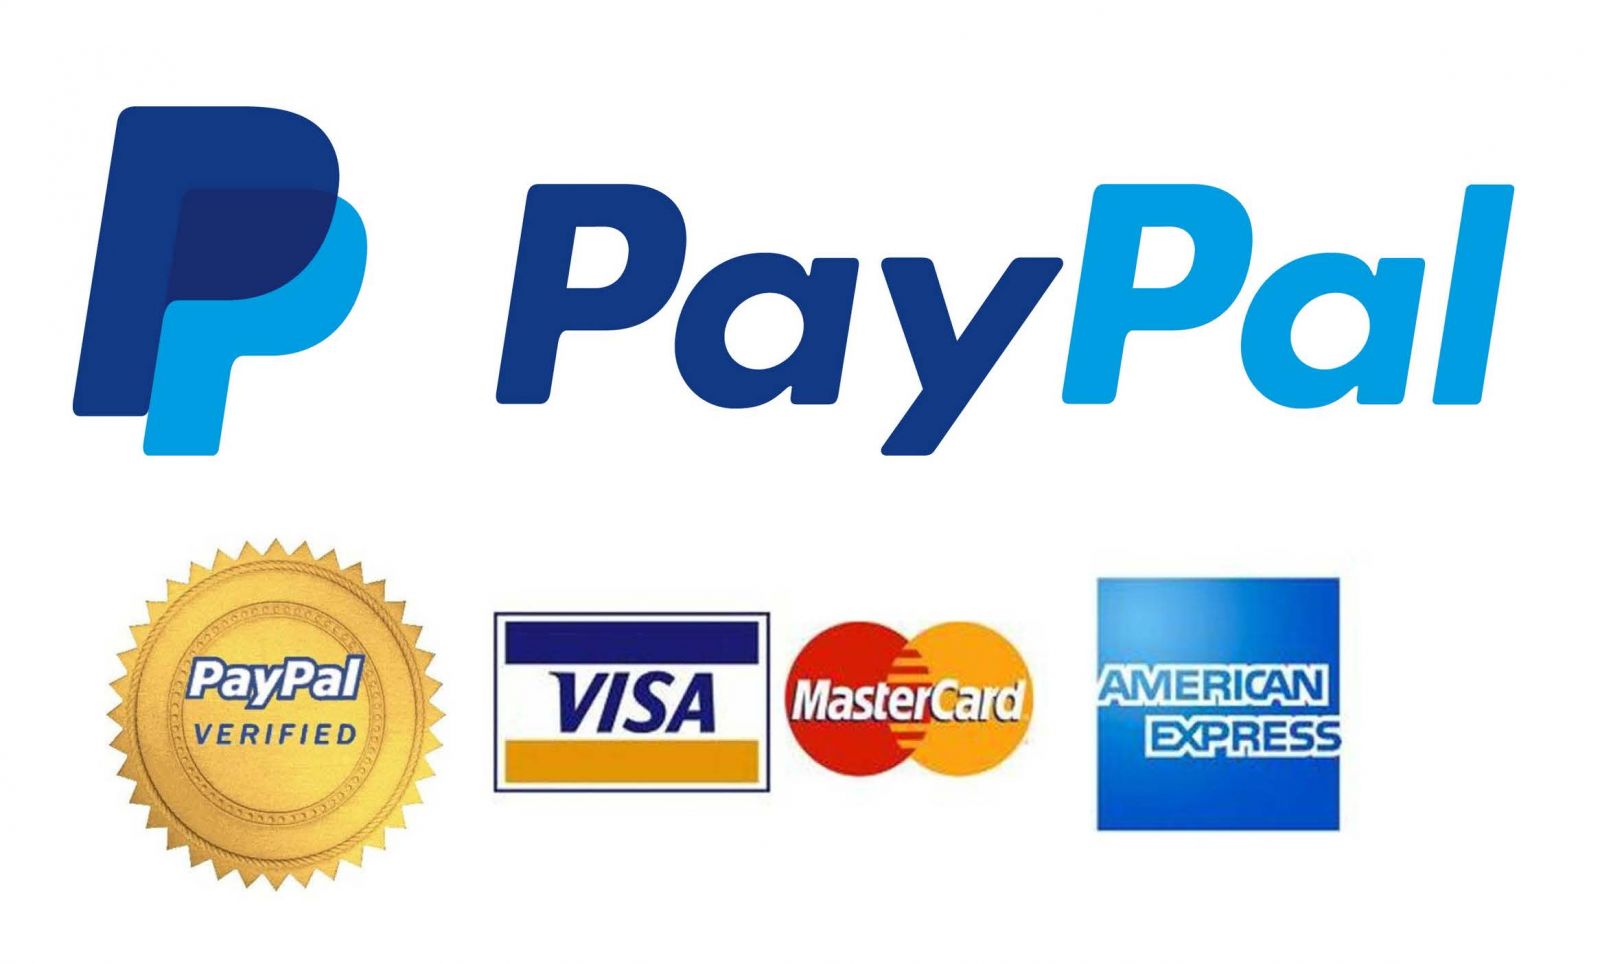 paypal secure payment